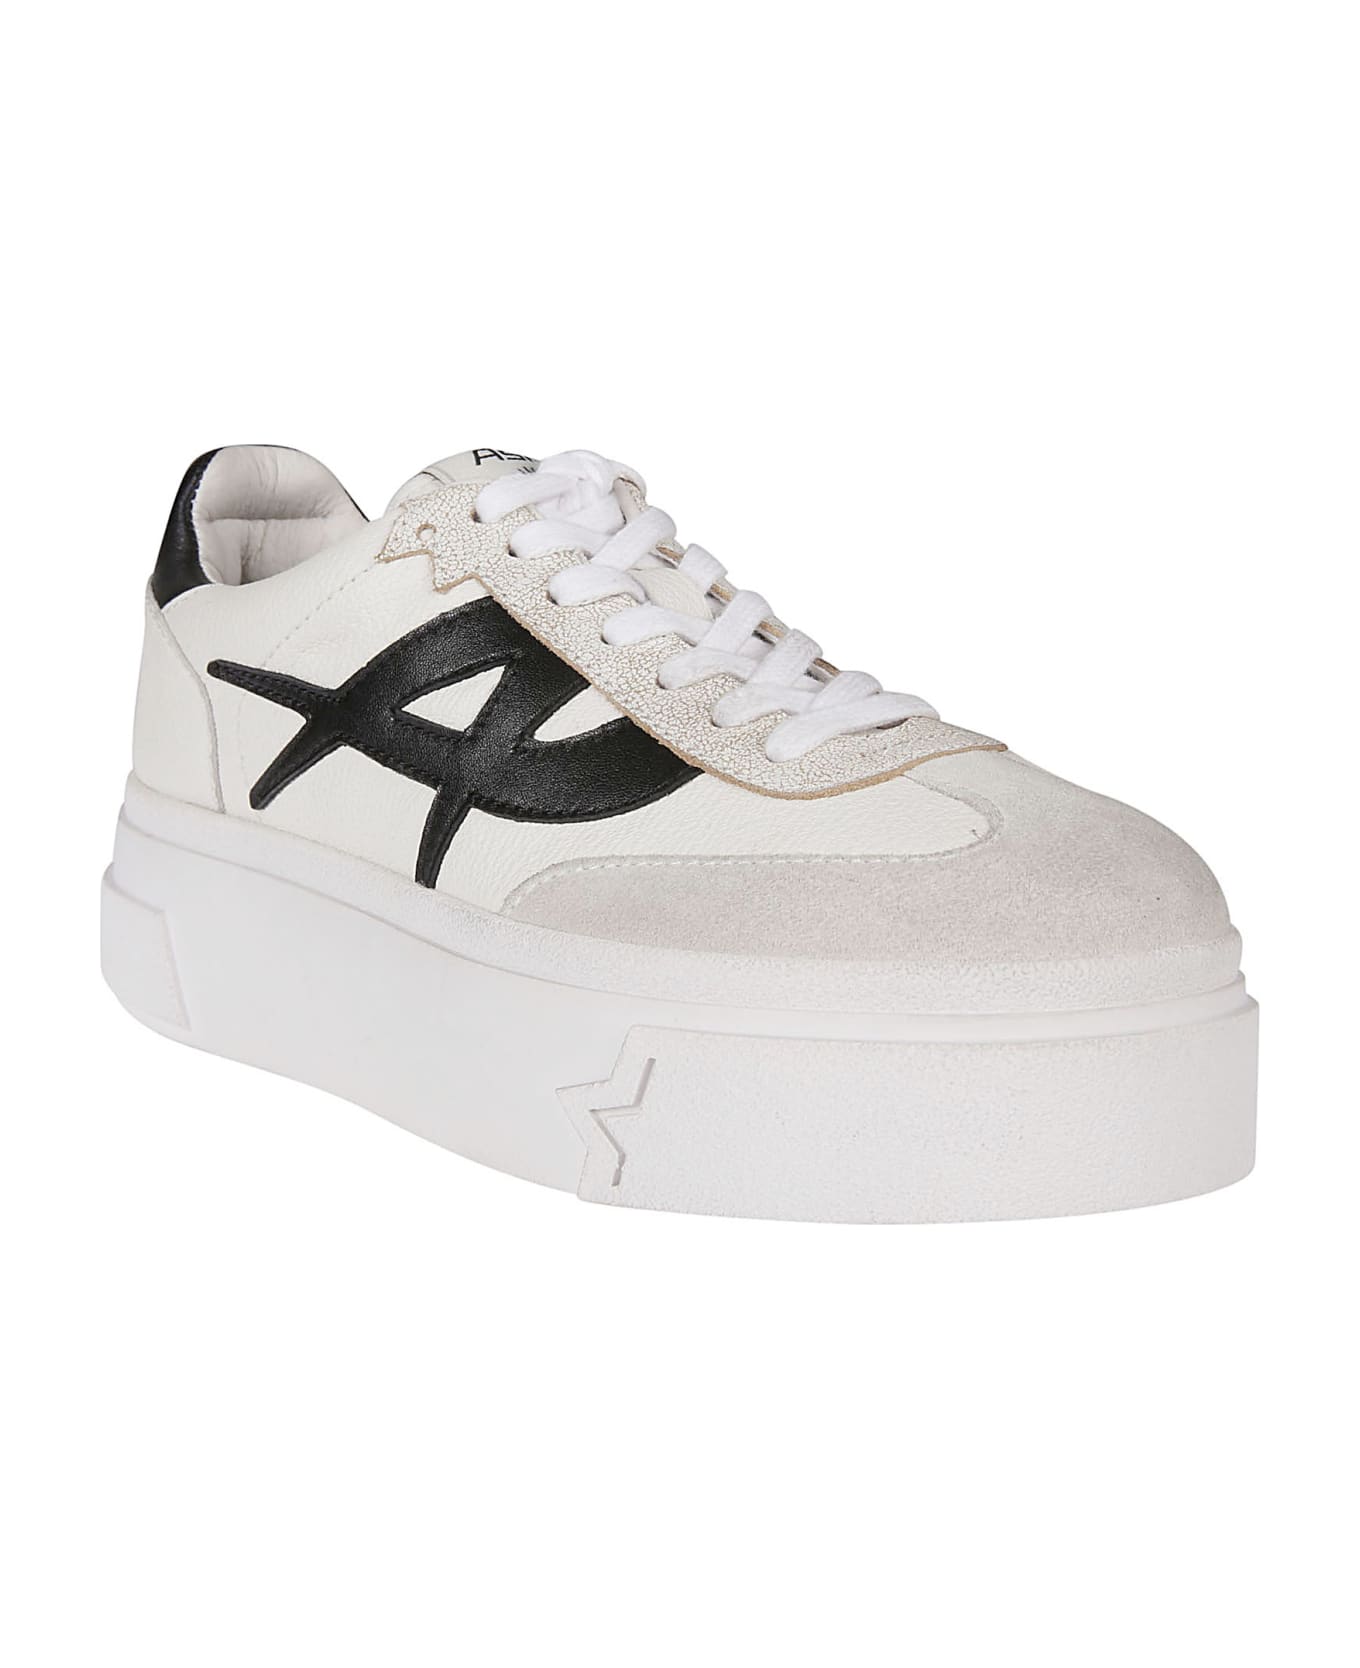 Ash Starmoon Sneakers - Off White/black スニーカー